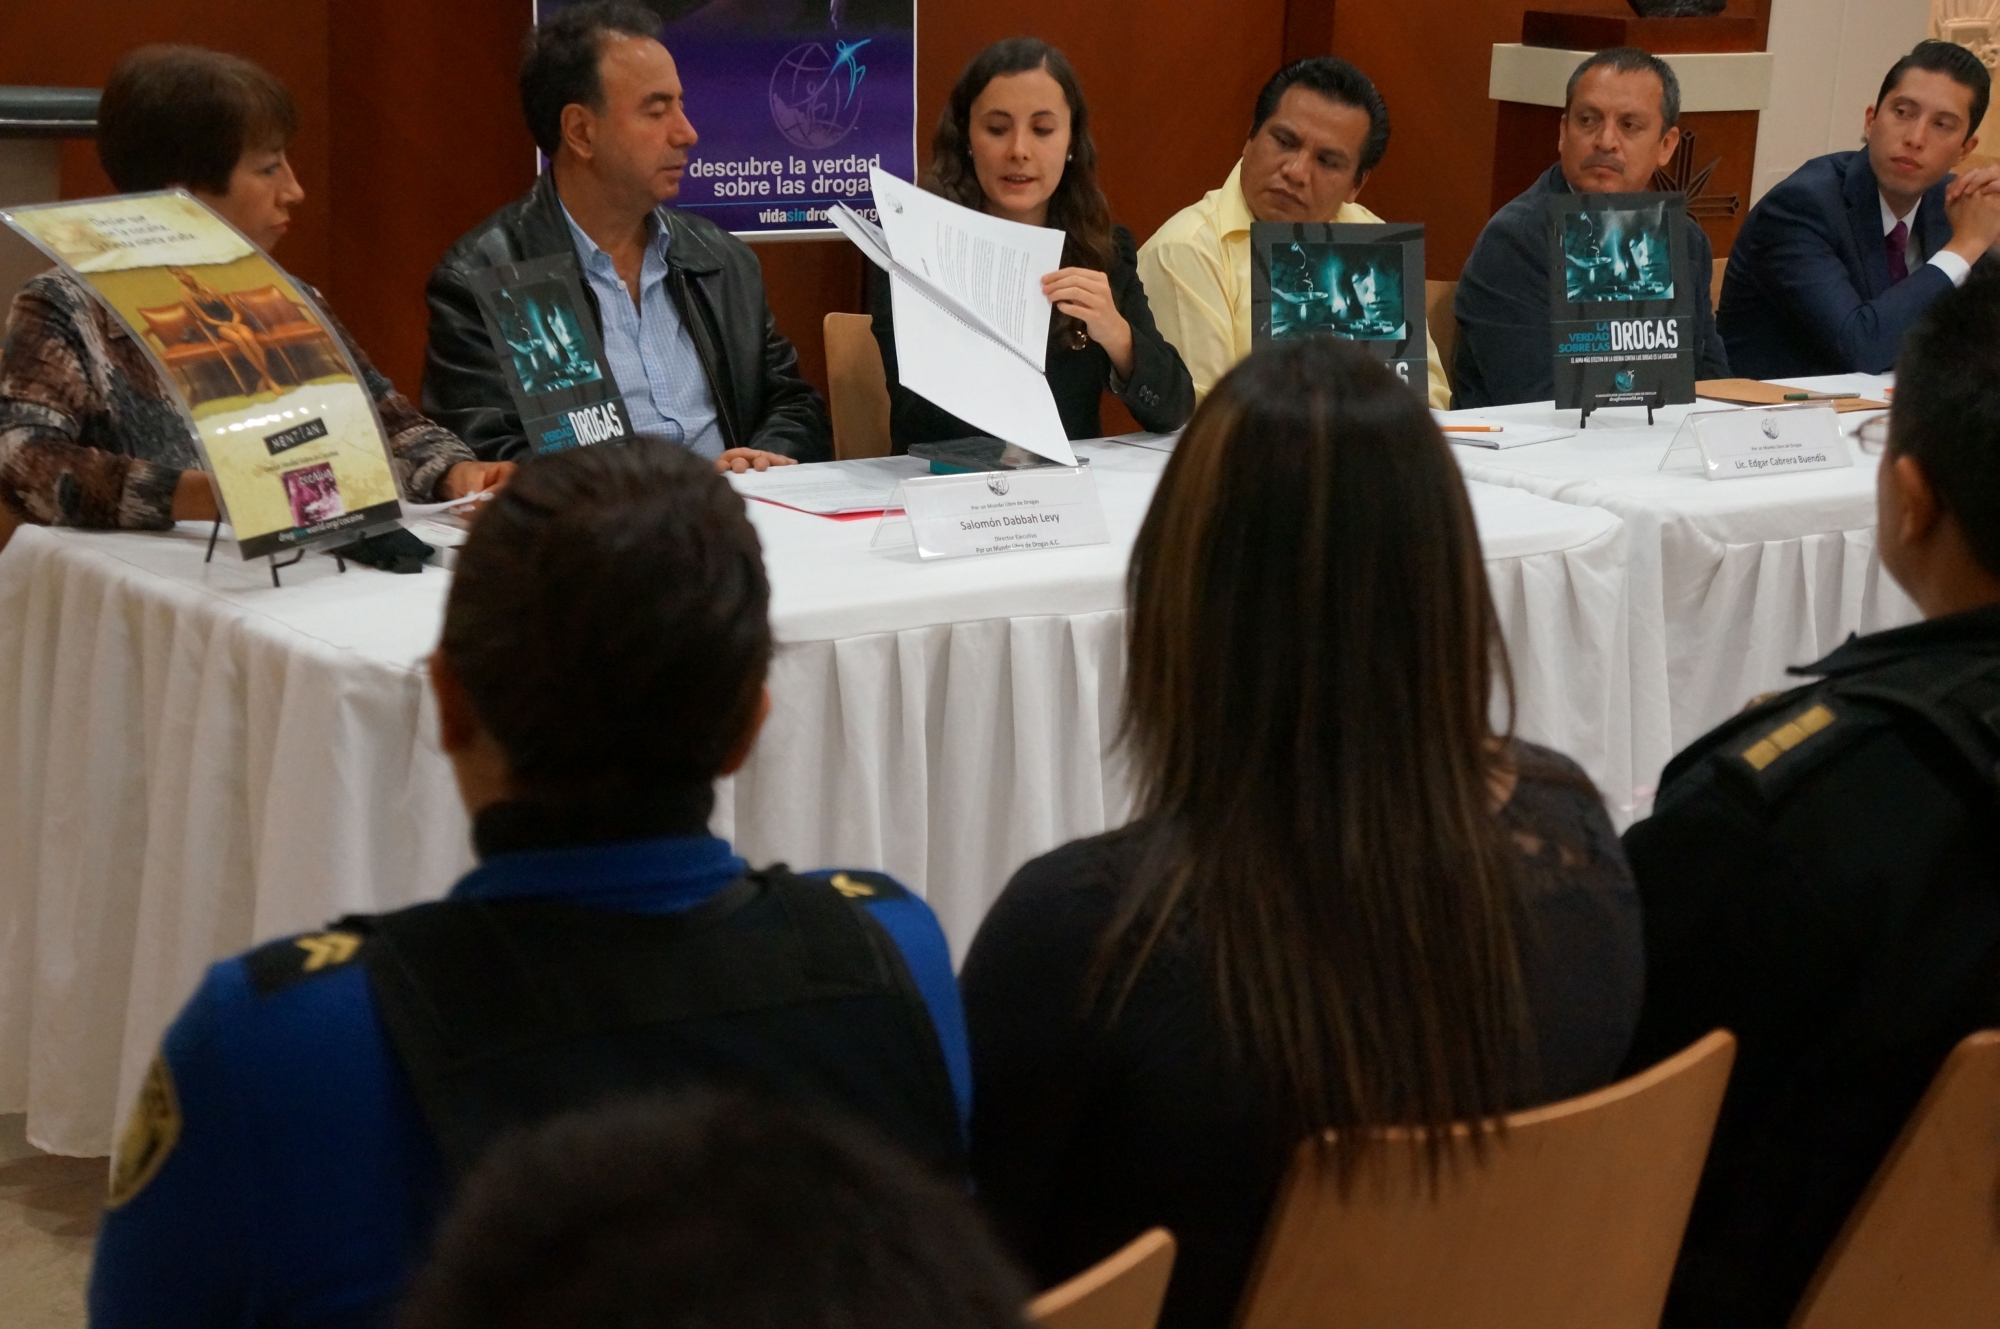 The Truth About Drugs Forum at the National Scientology Organization of Mexico brought together community groups concerned with tackling drug abuse in Mexico City.